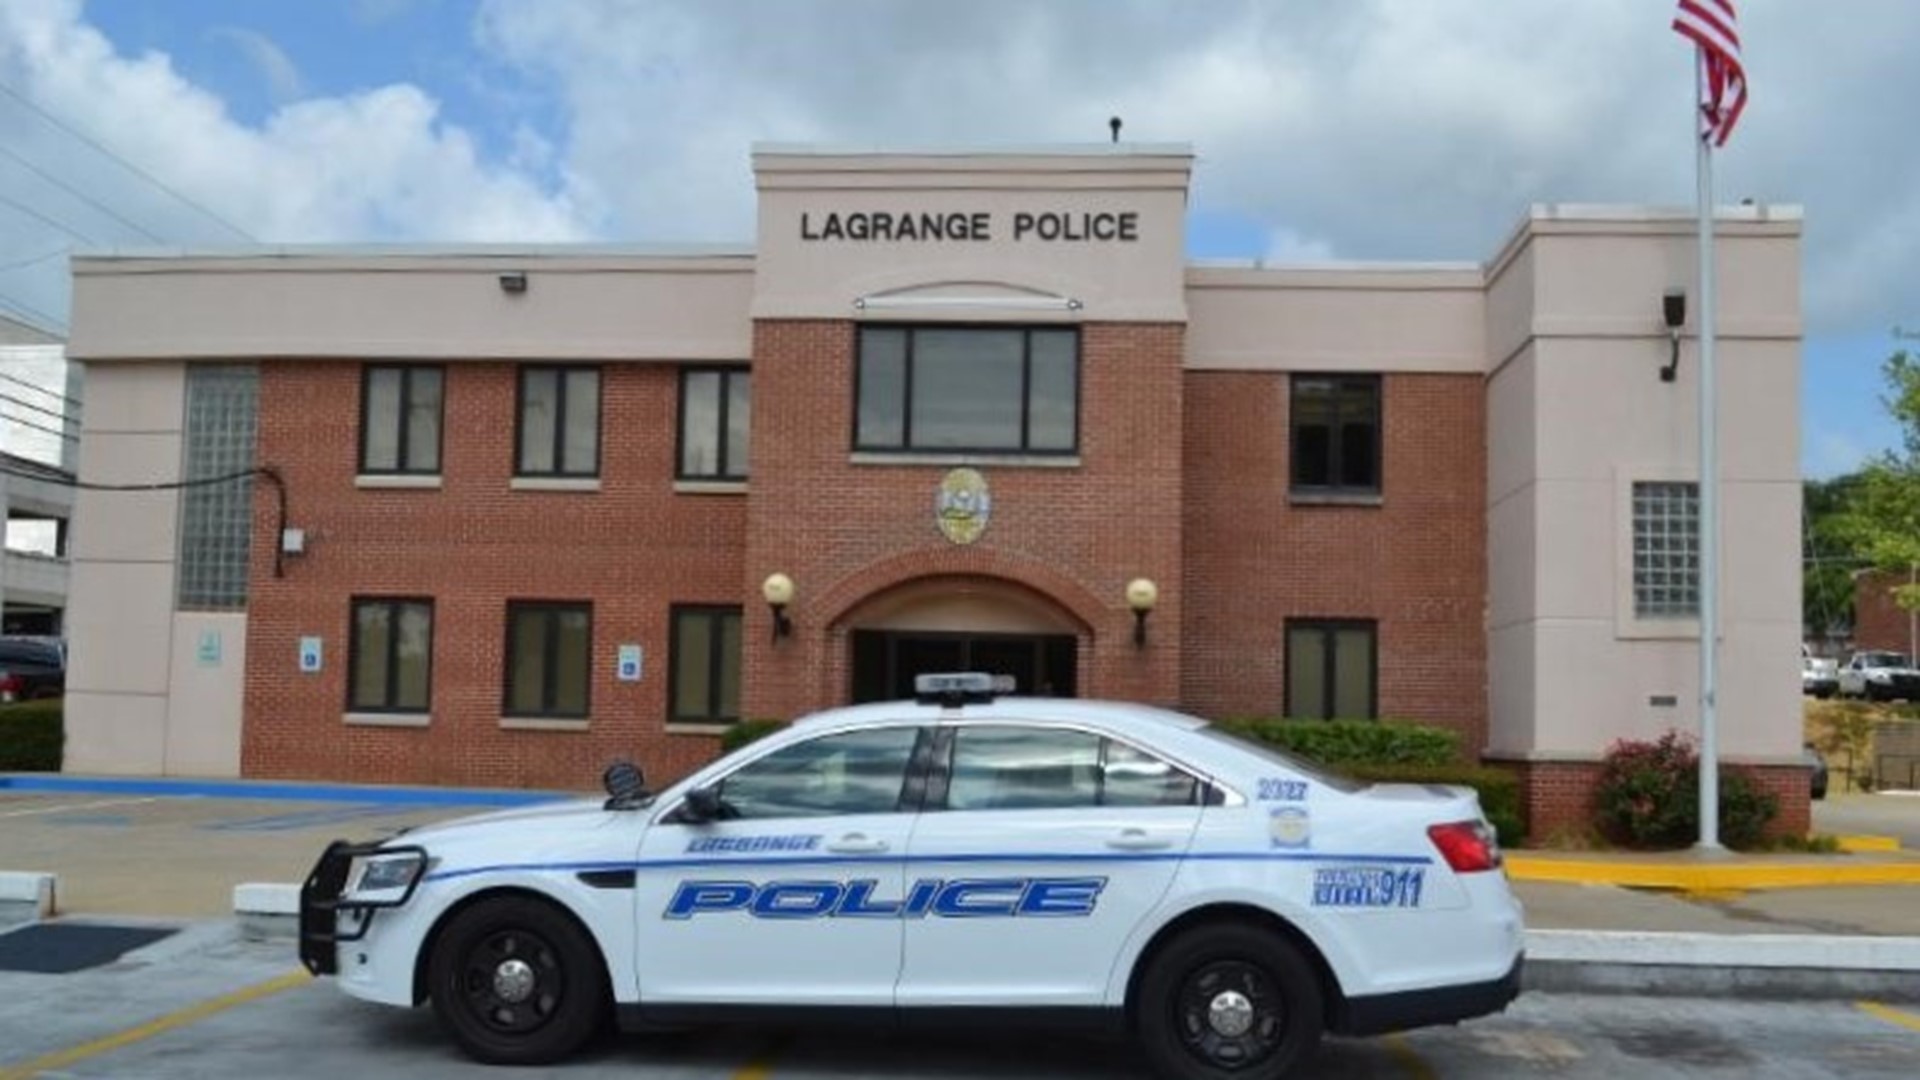 It happened in the early hours of Tuesday morning in LaGrange. Police say the man was wanted on drug-related charges and child cruelty.